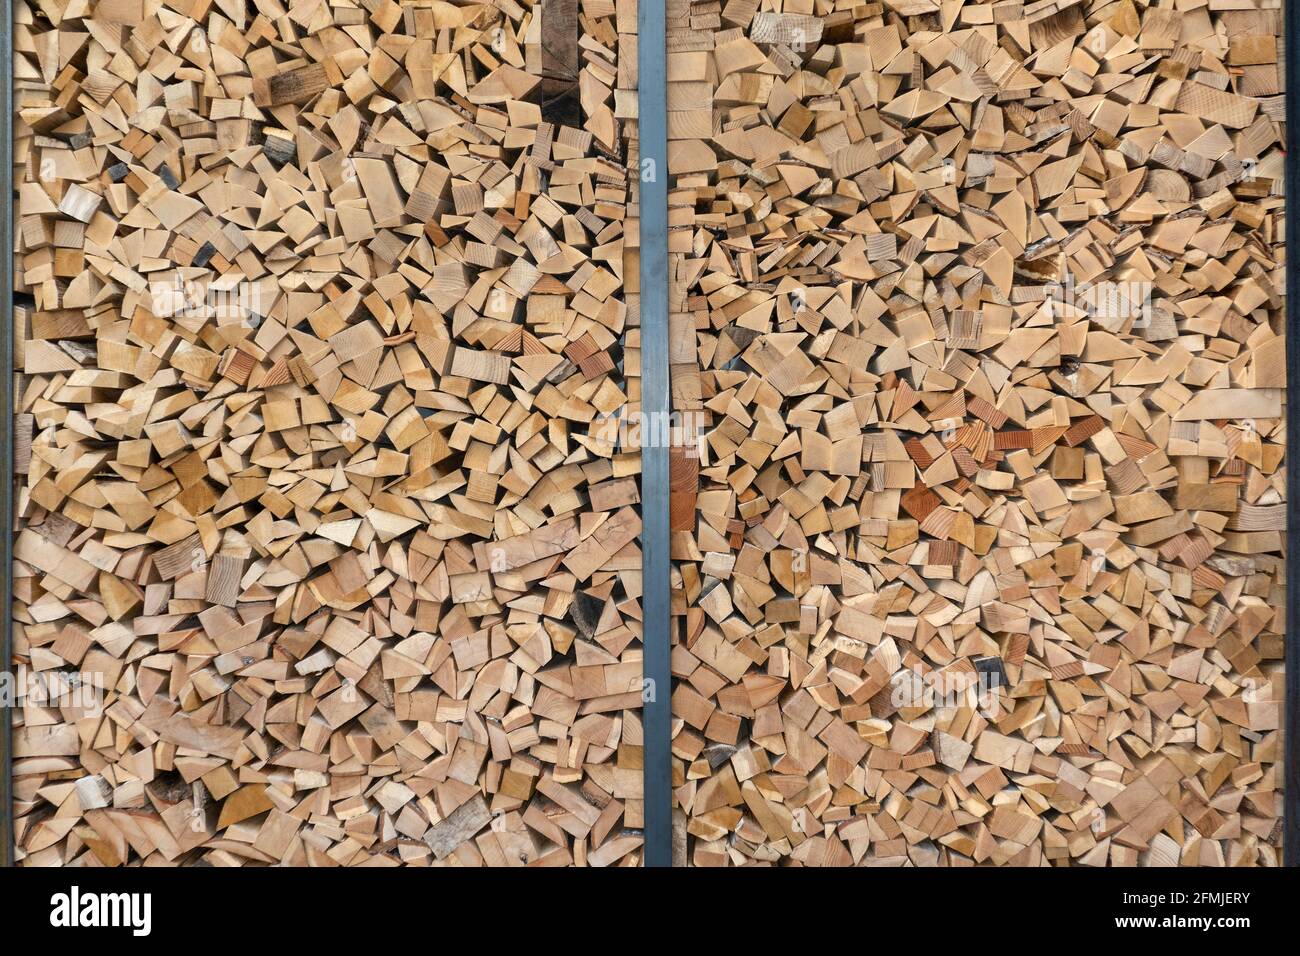 Stacked firewood with parts of boards and wooden strips Stock Photo